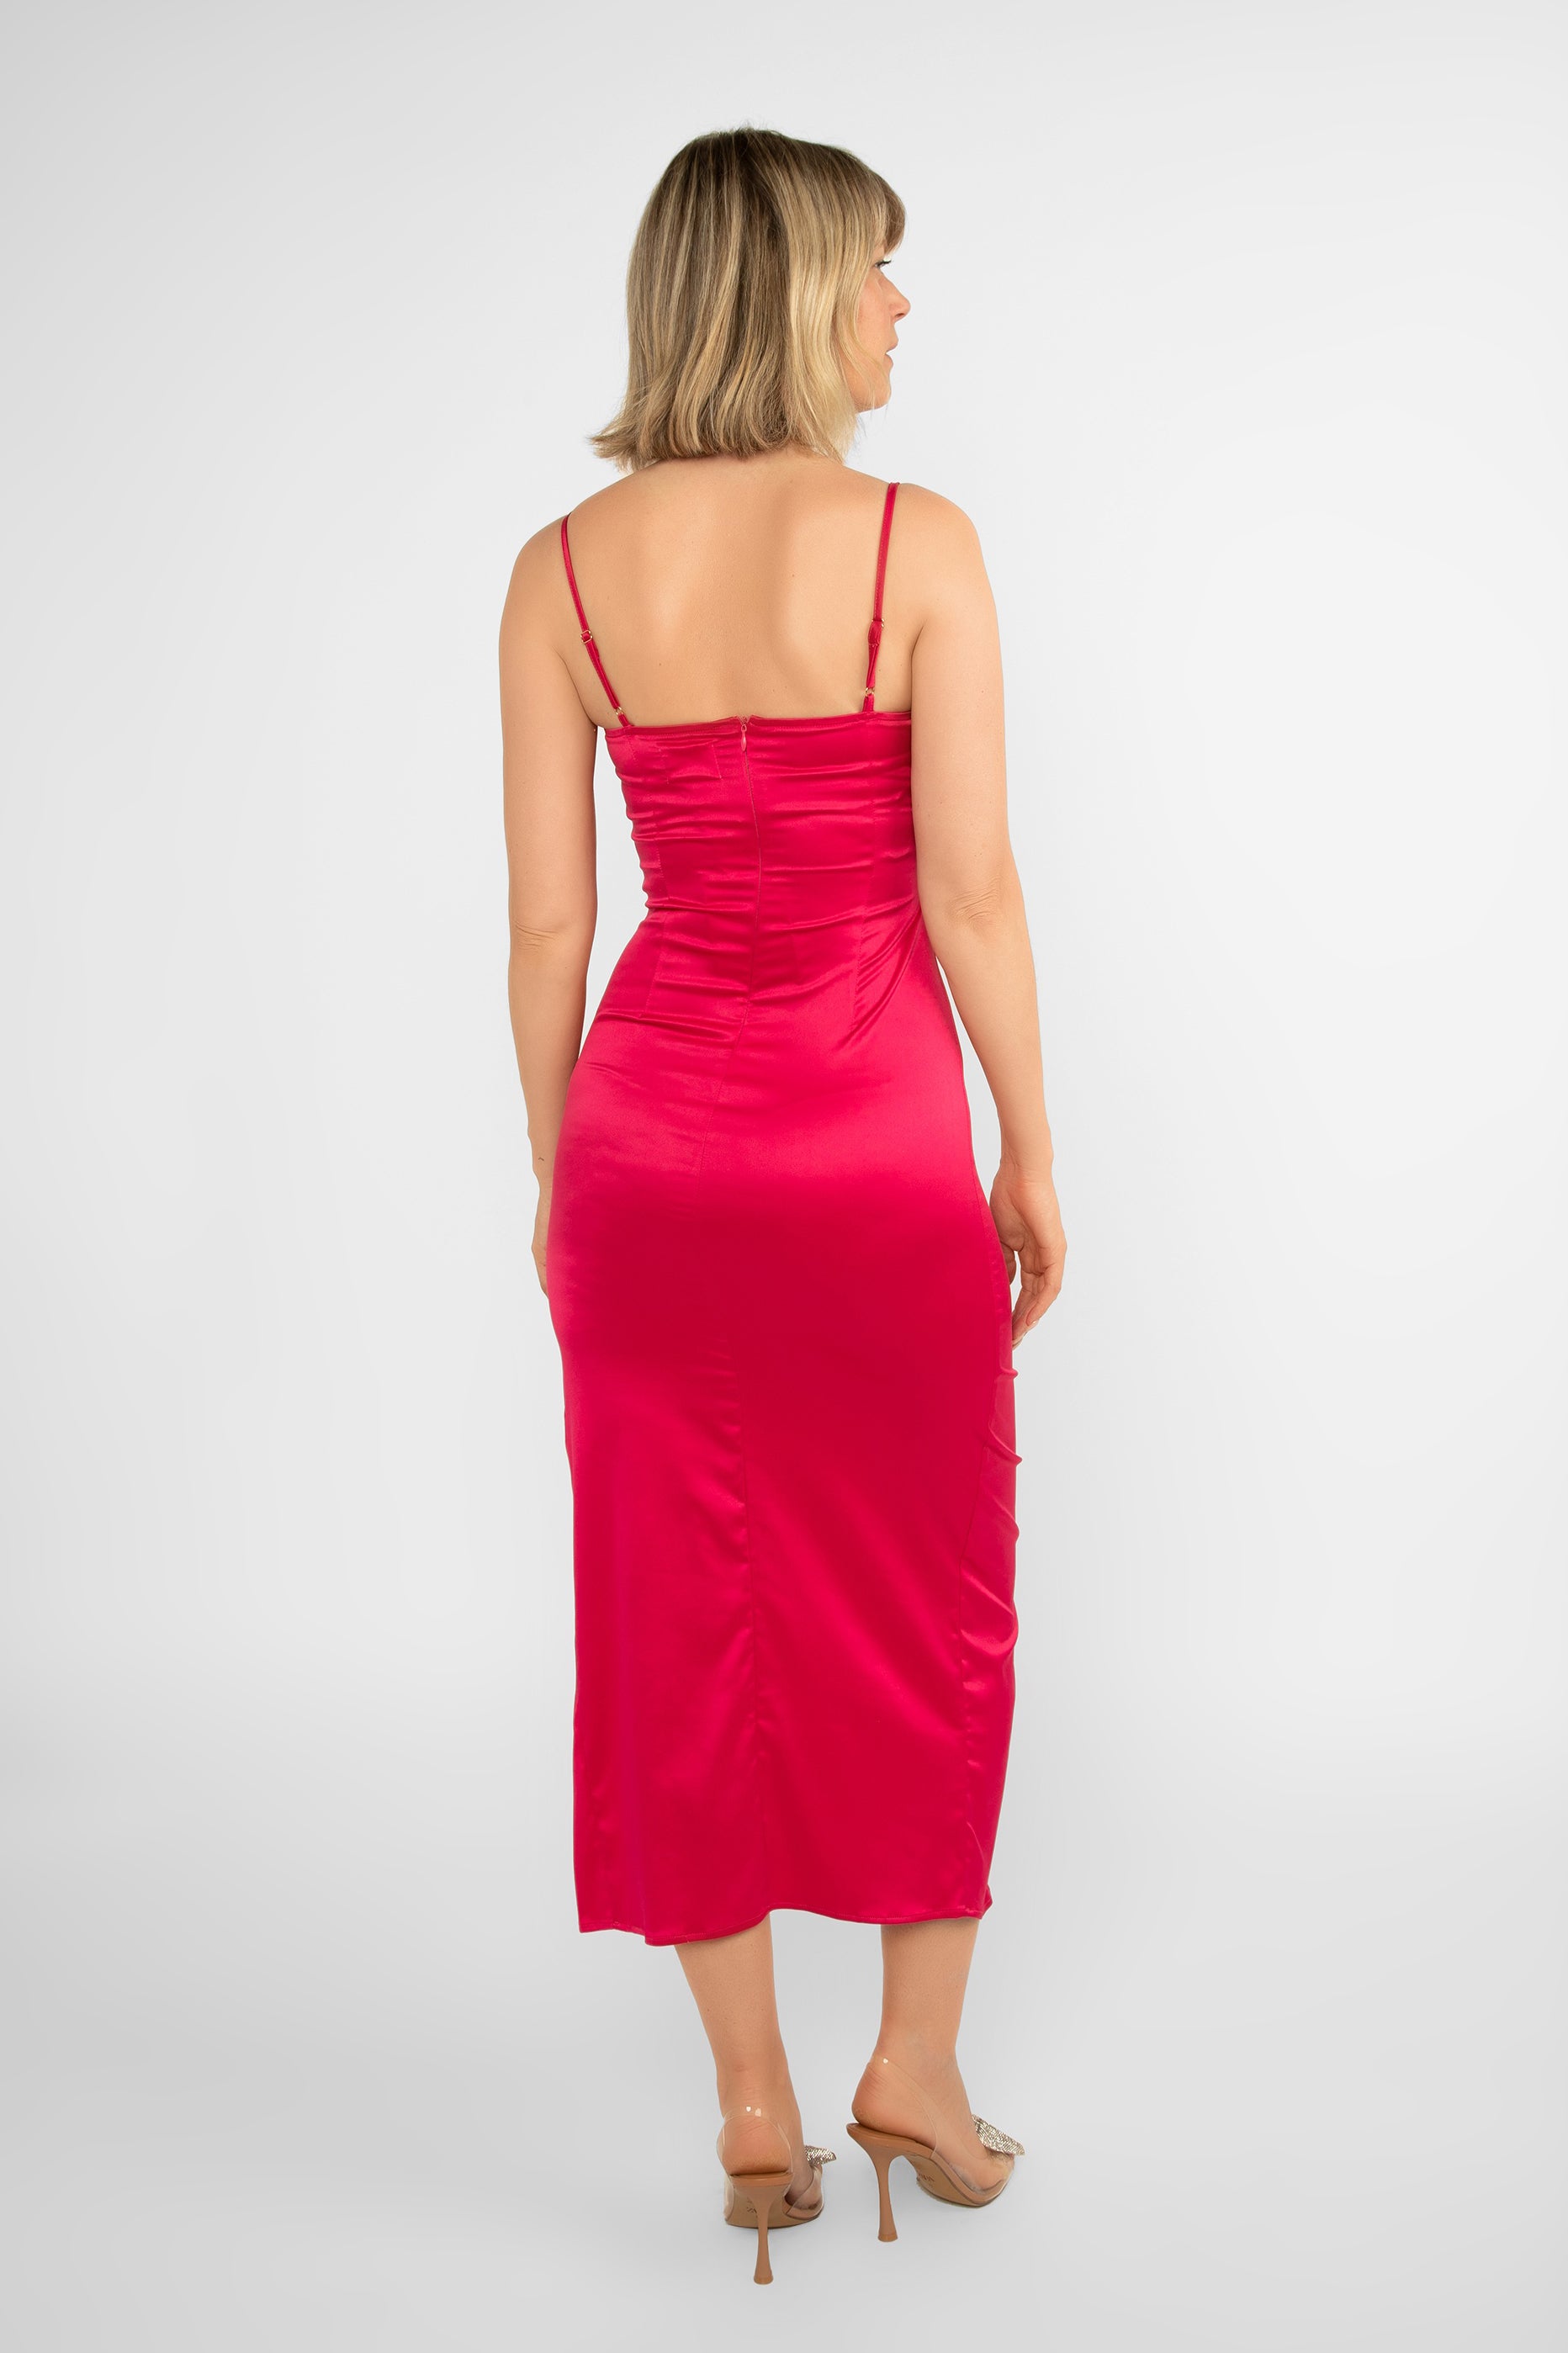 Back view of LATE (DR-2918400) Monica Dress - Satin Midi Body Con Dress with High Side split and curve accentuating ruching in hot pink